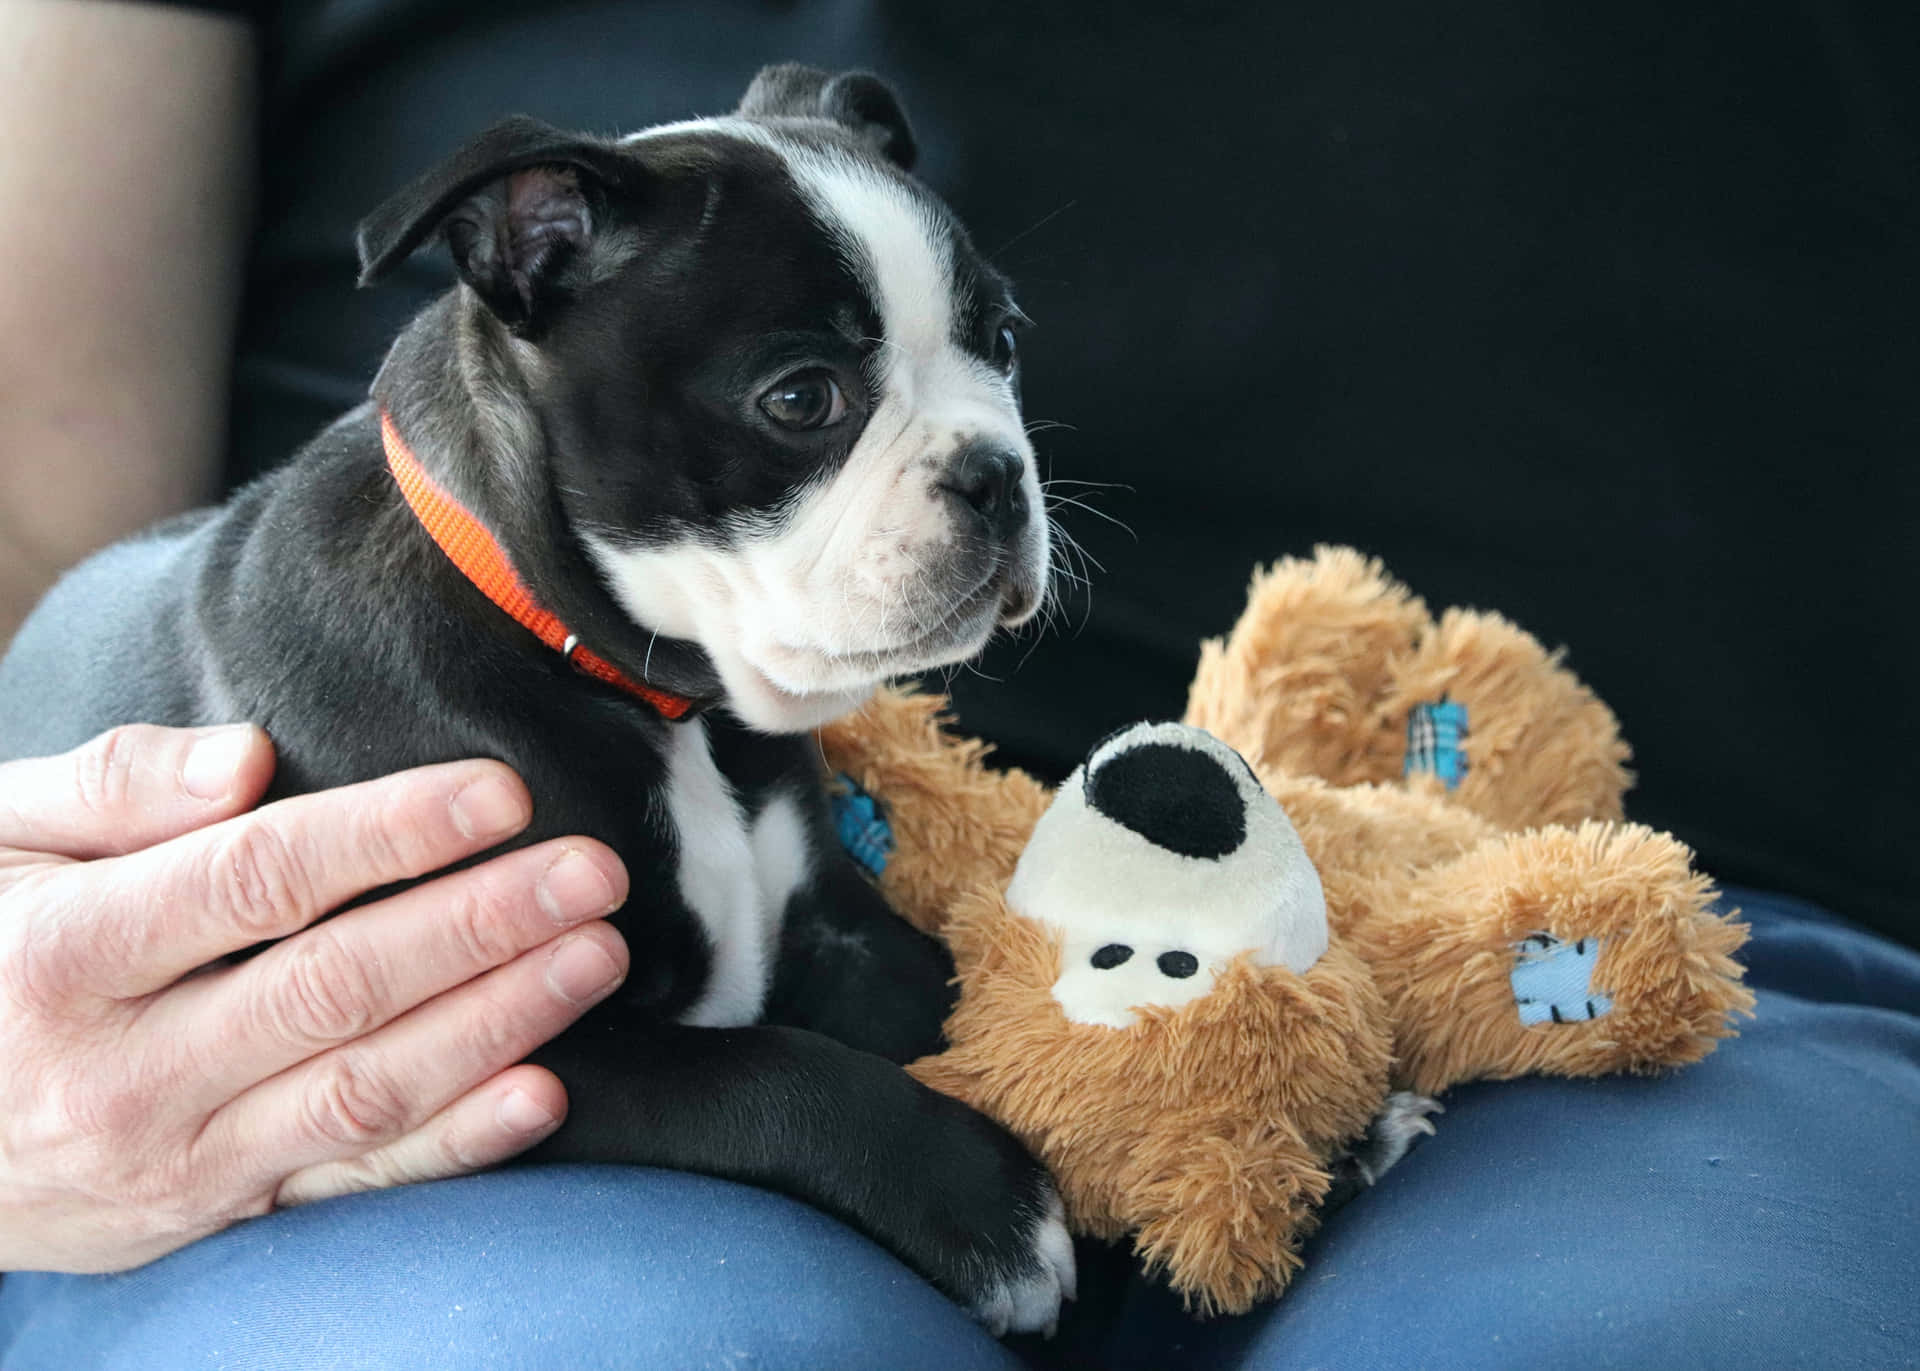 Puppy With Stuffed Toyand Human Hand